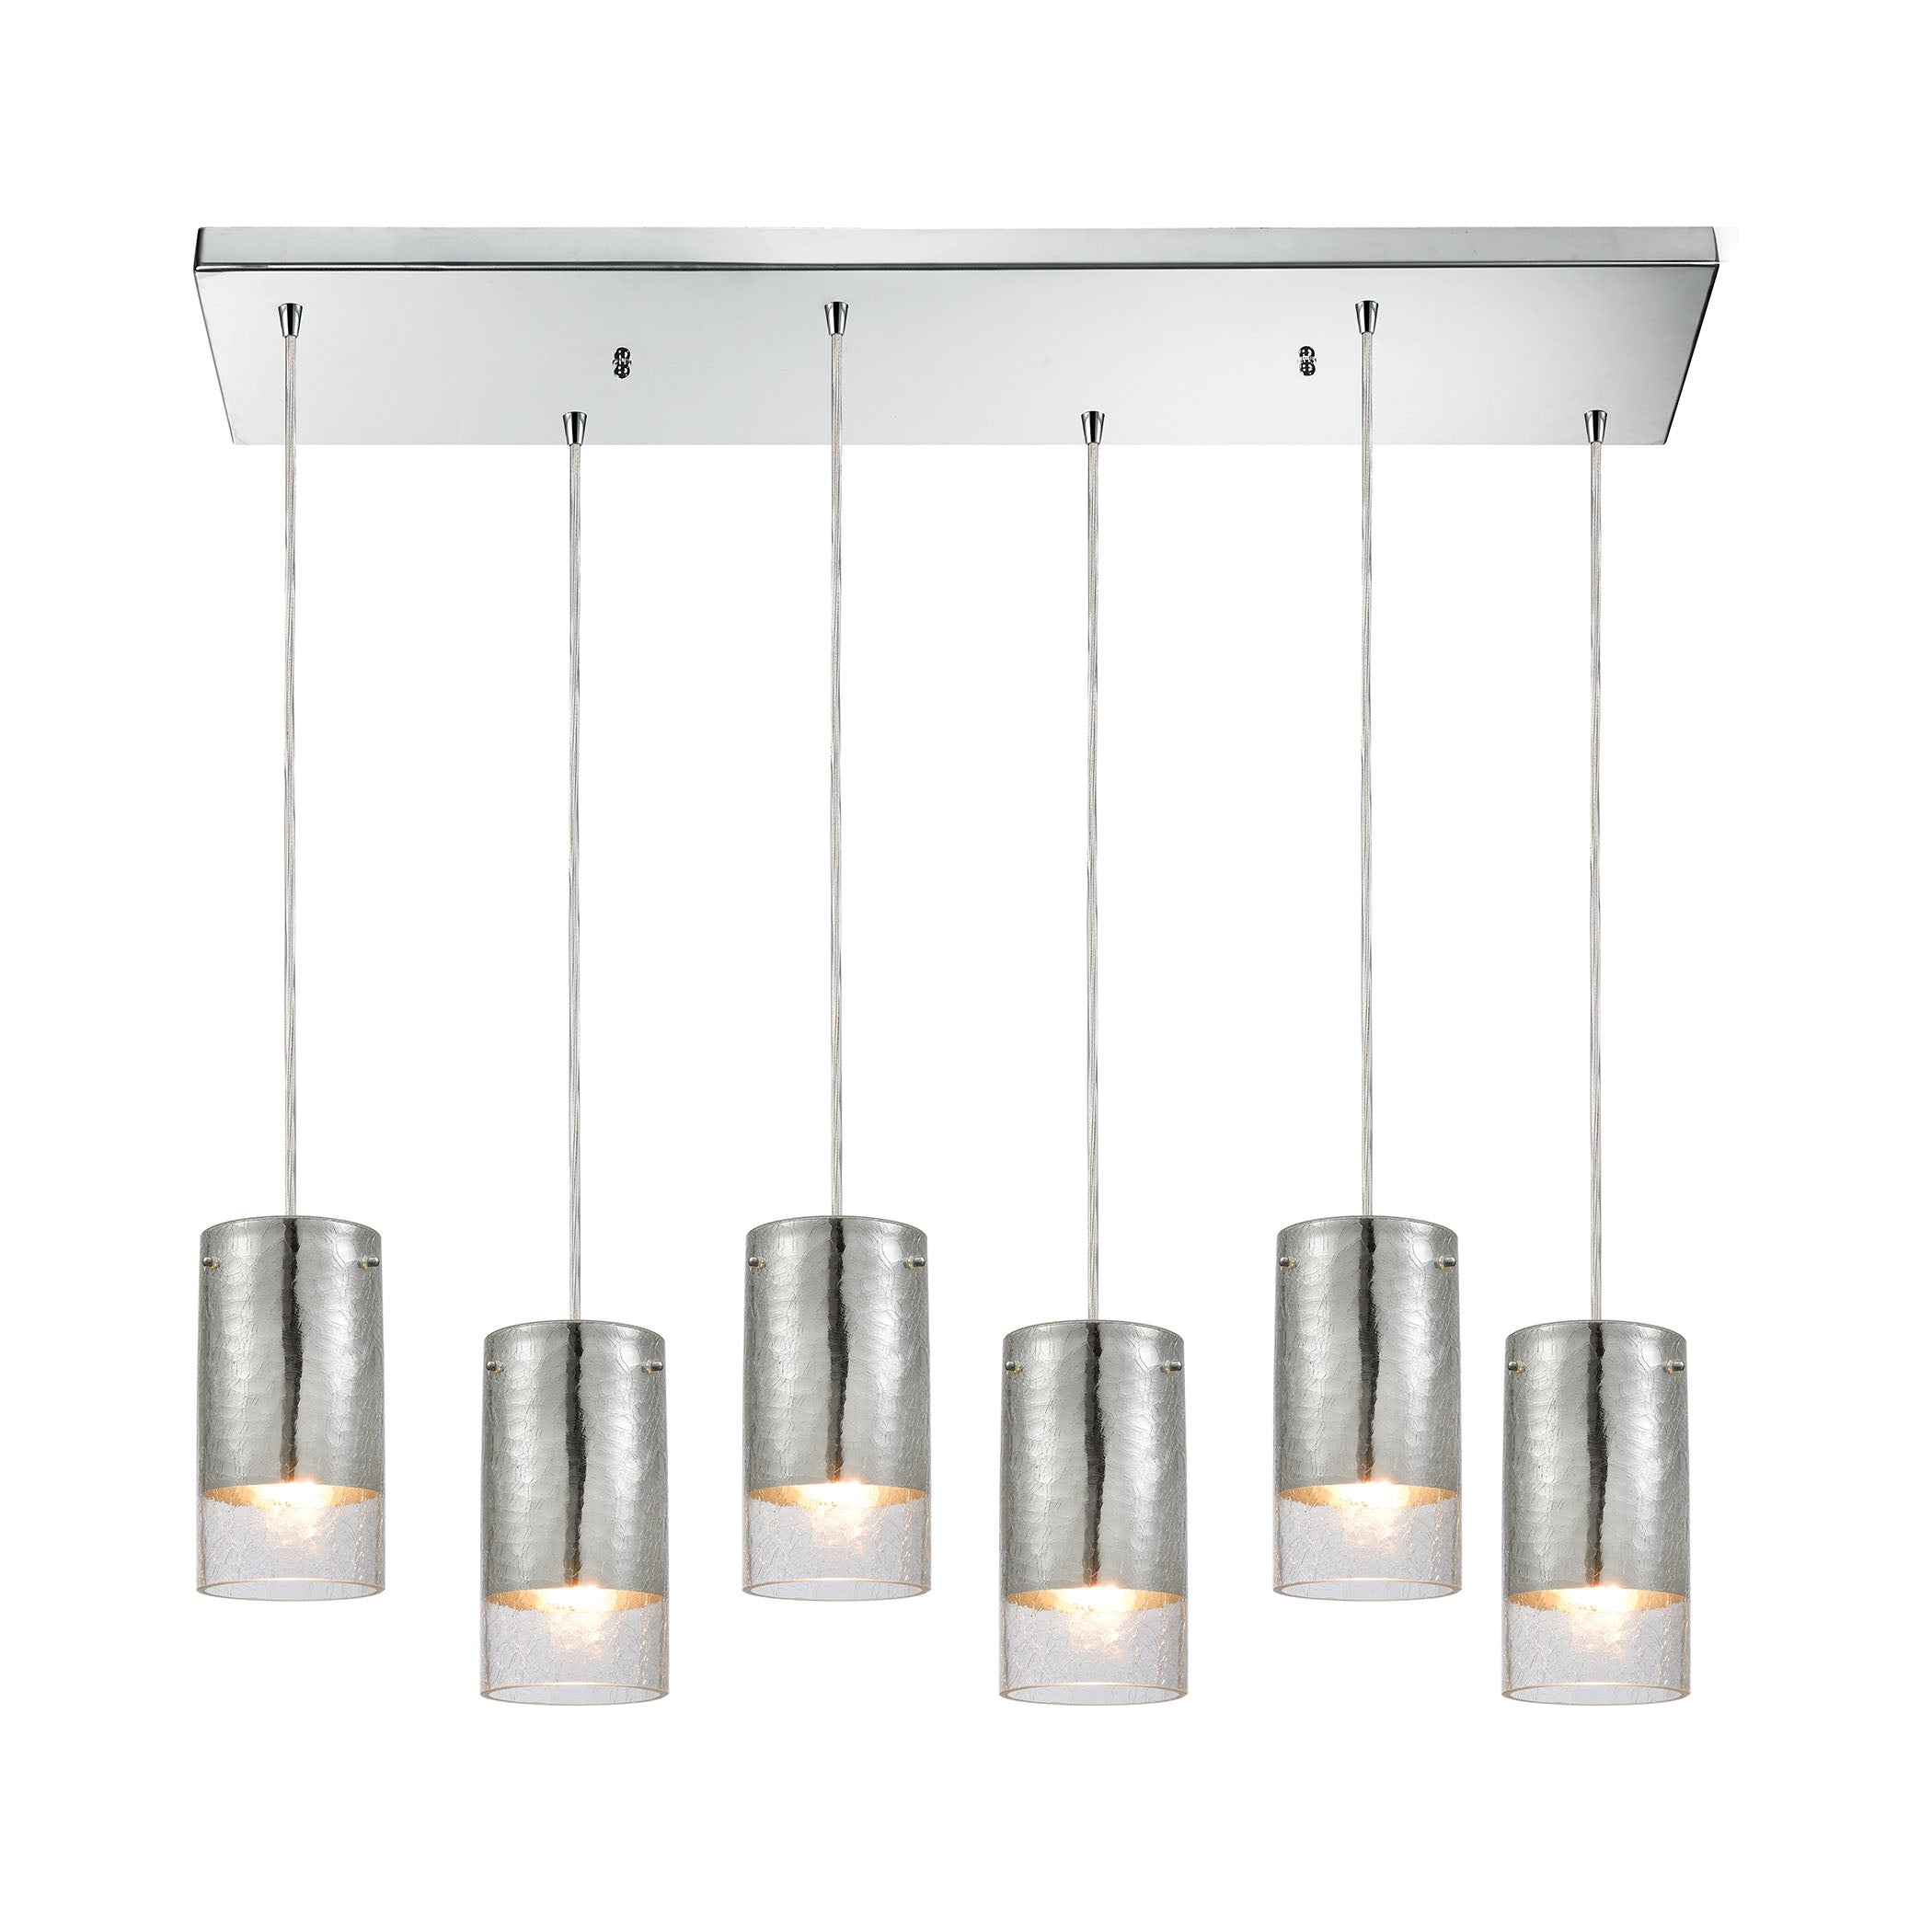 ELK Lighting 10570/6RC Tallula 6-Light Rectangular Pendant Fixture in Chrome with Chrome-plated and Clear Crackle Glass